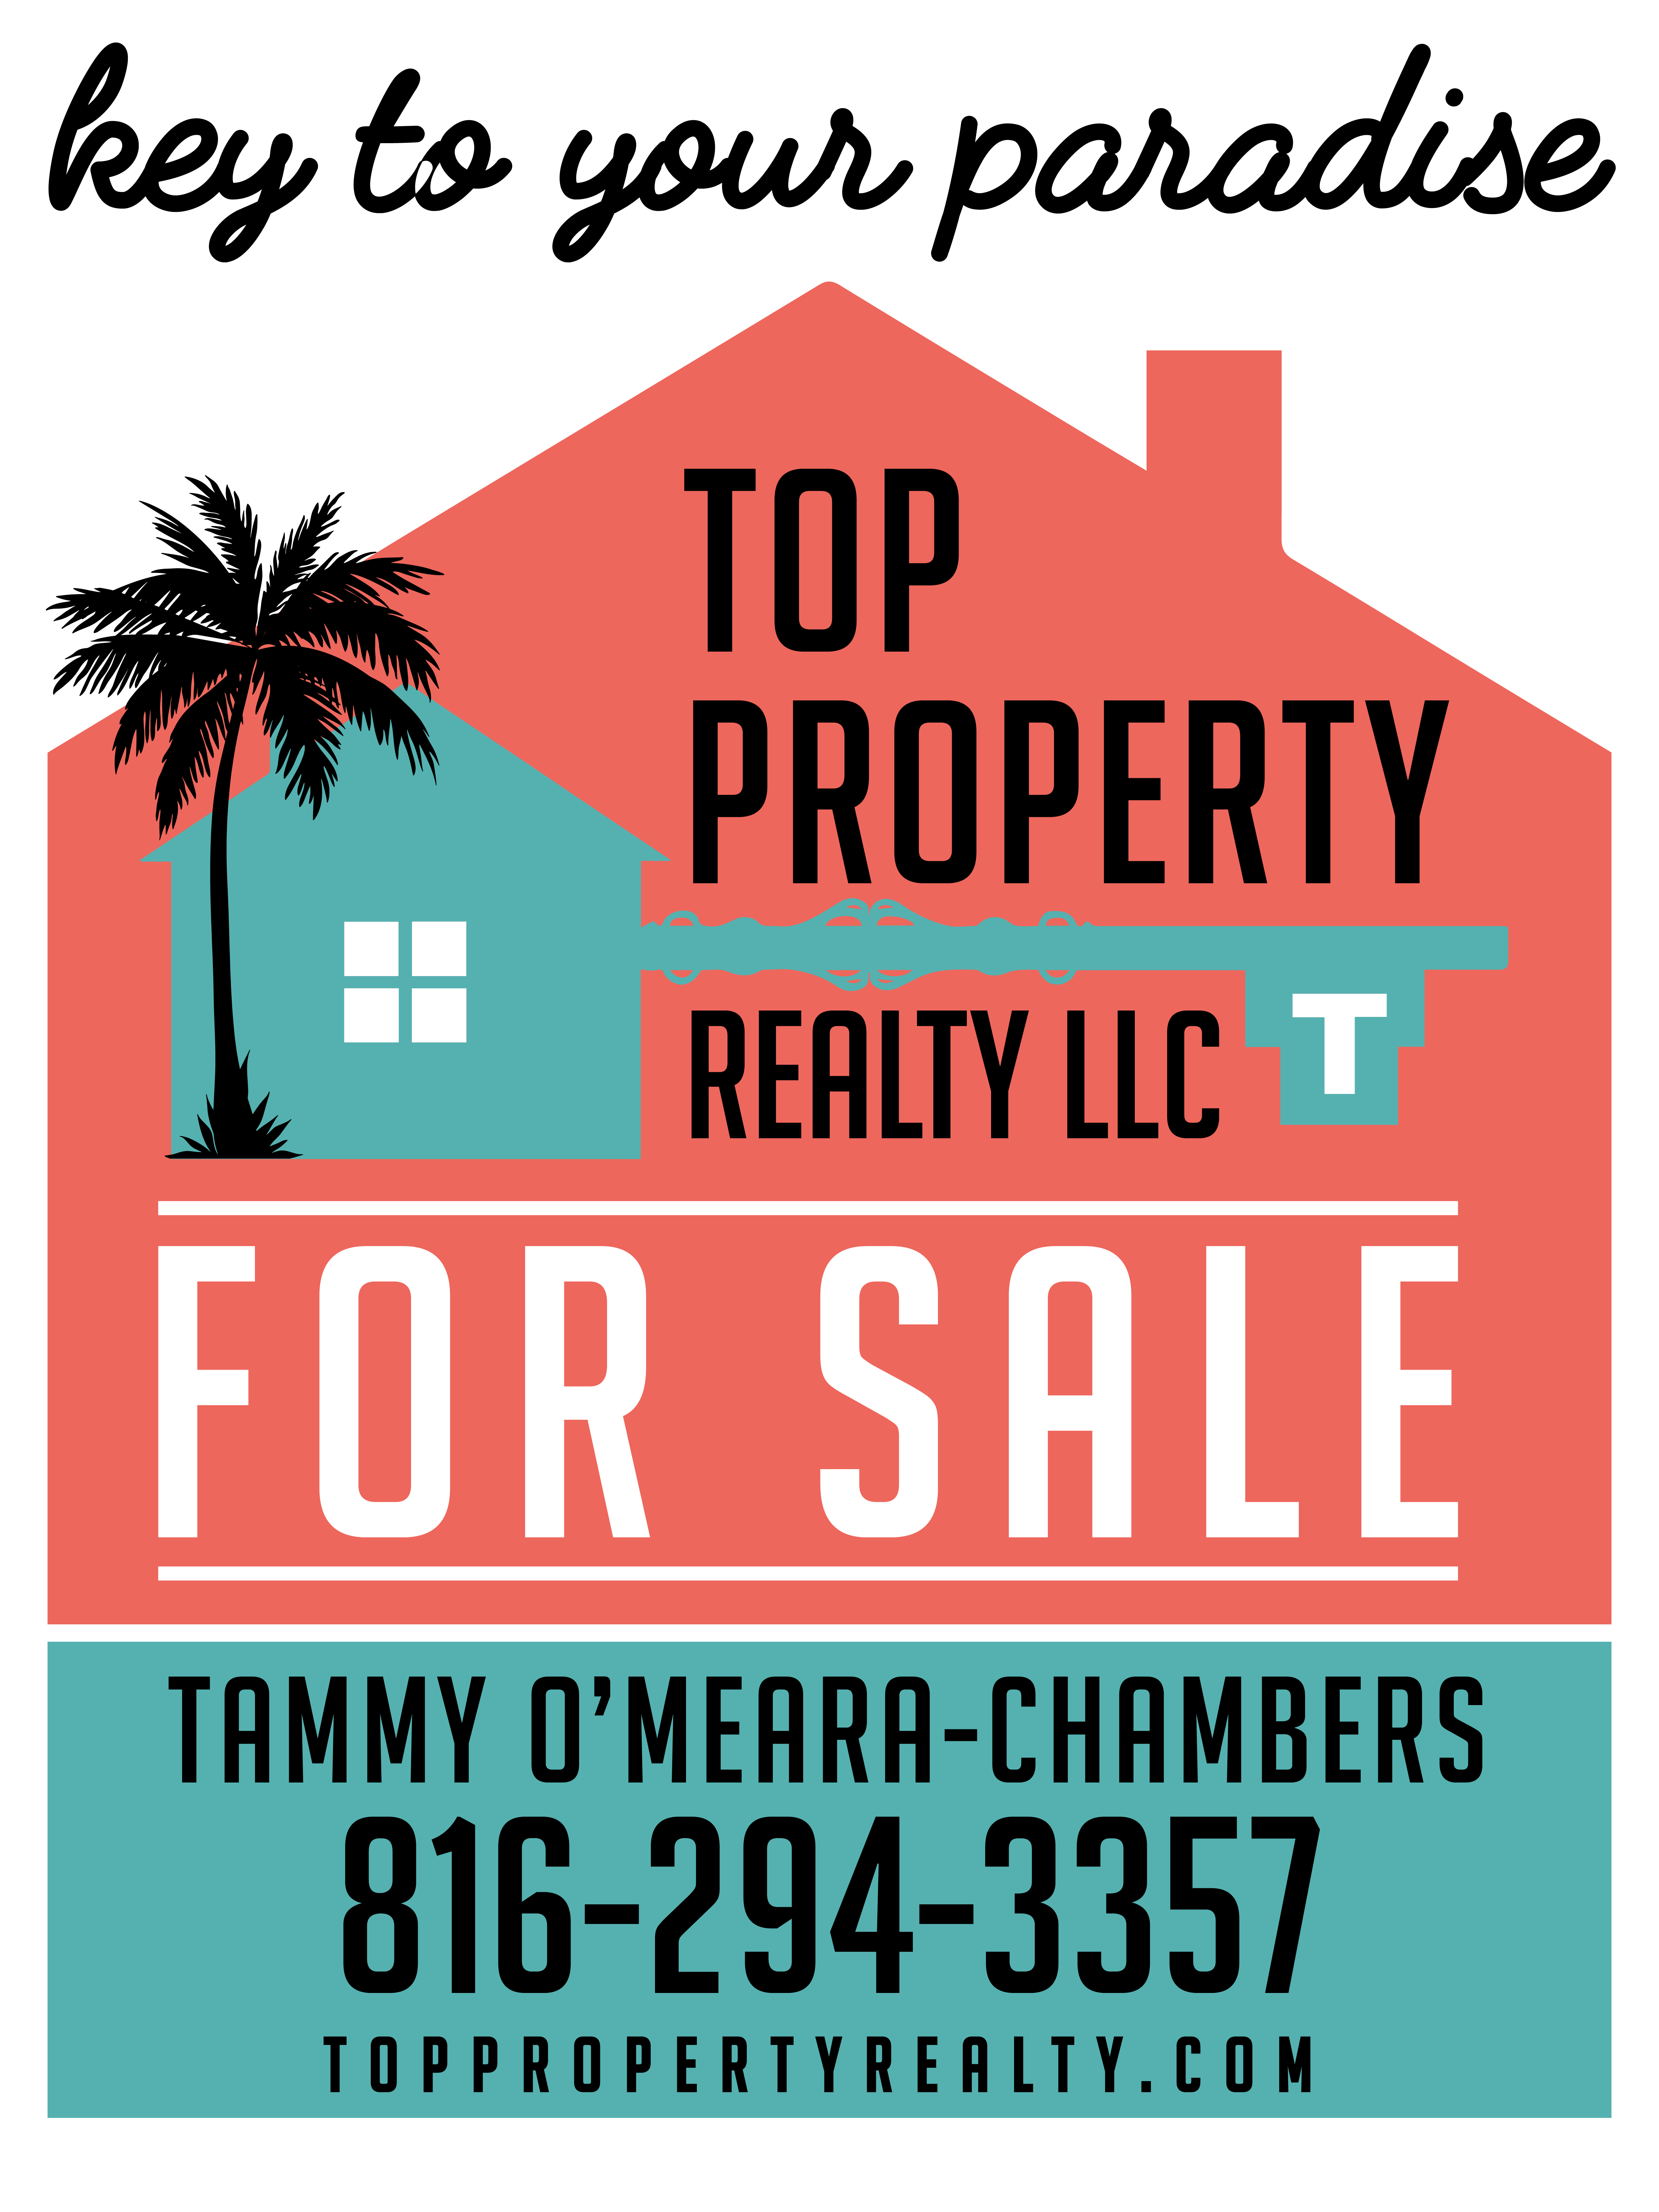 Top Property Realty